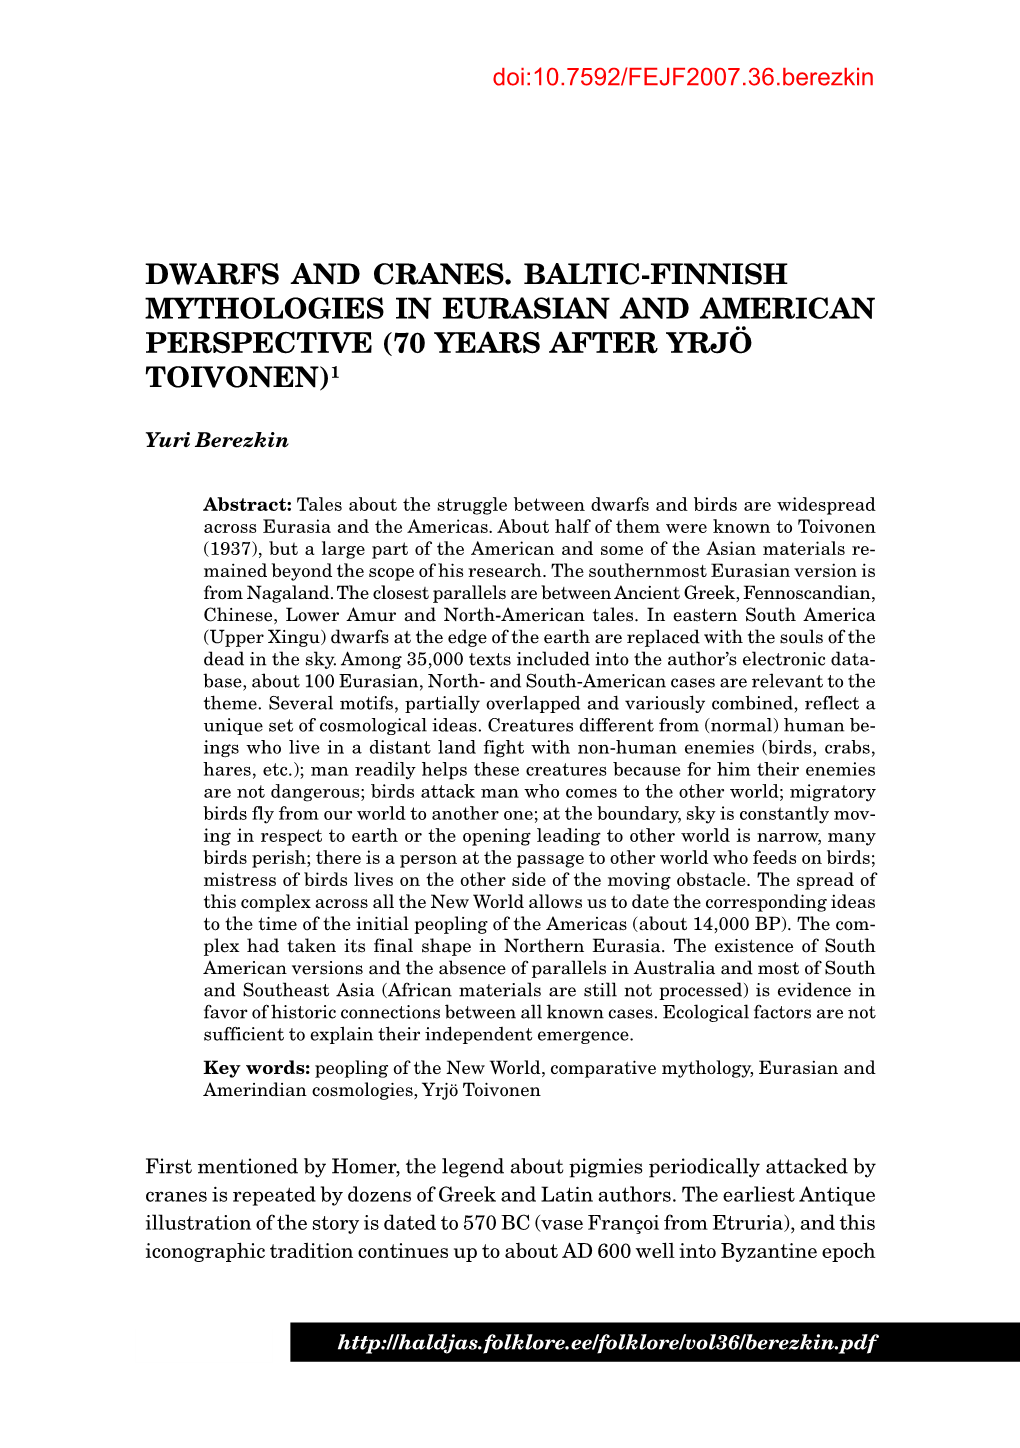 Dwarfs and Cranes. Baltic-Finnish Mythologies in Eurasian and American Perspective (70 Years After Yrjö Toivonen)1